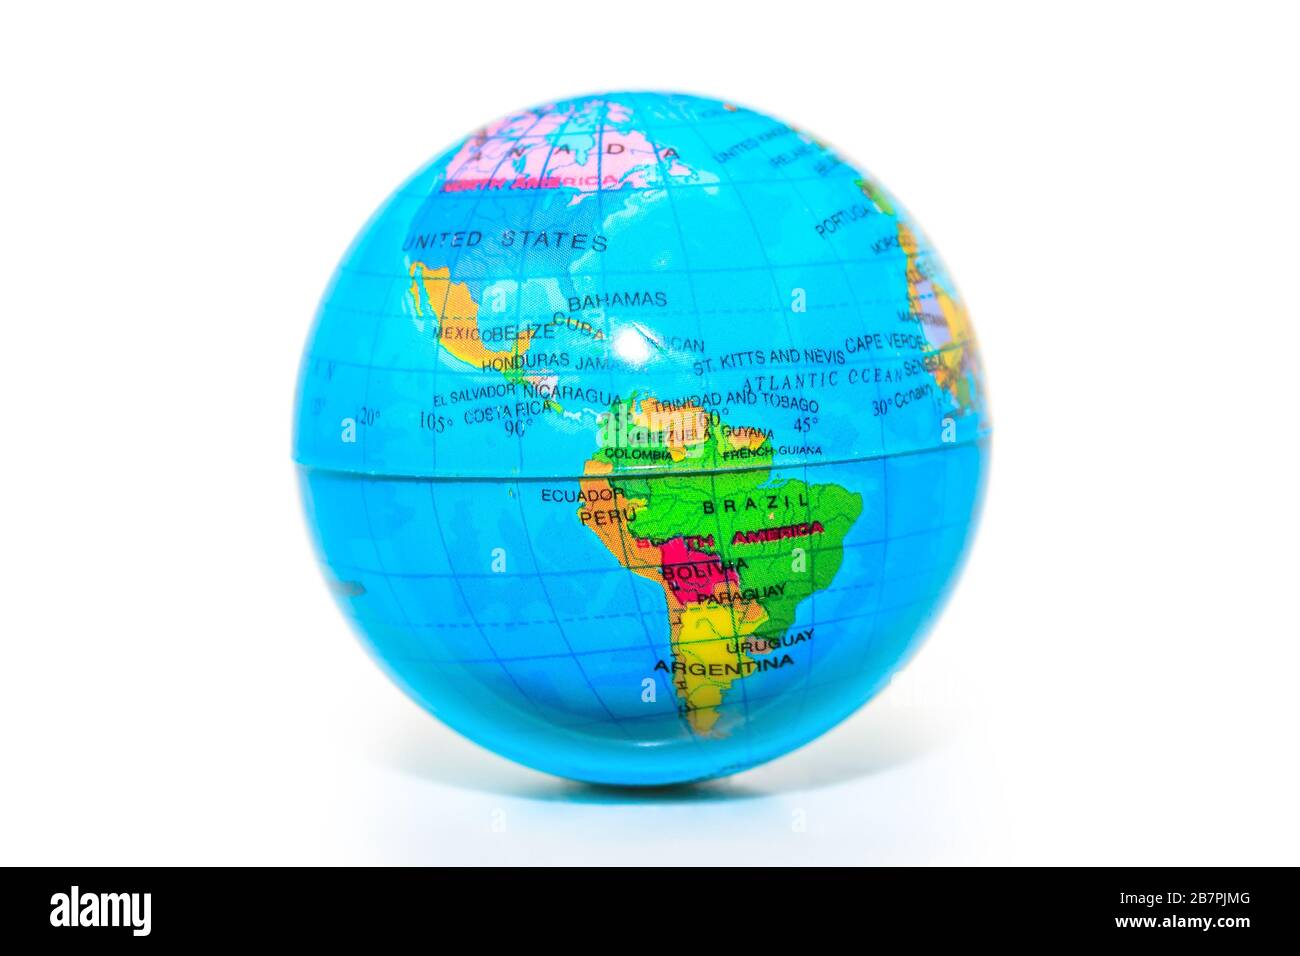 world globe isolated on white background. American face of the planet earth. Stock Photo